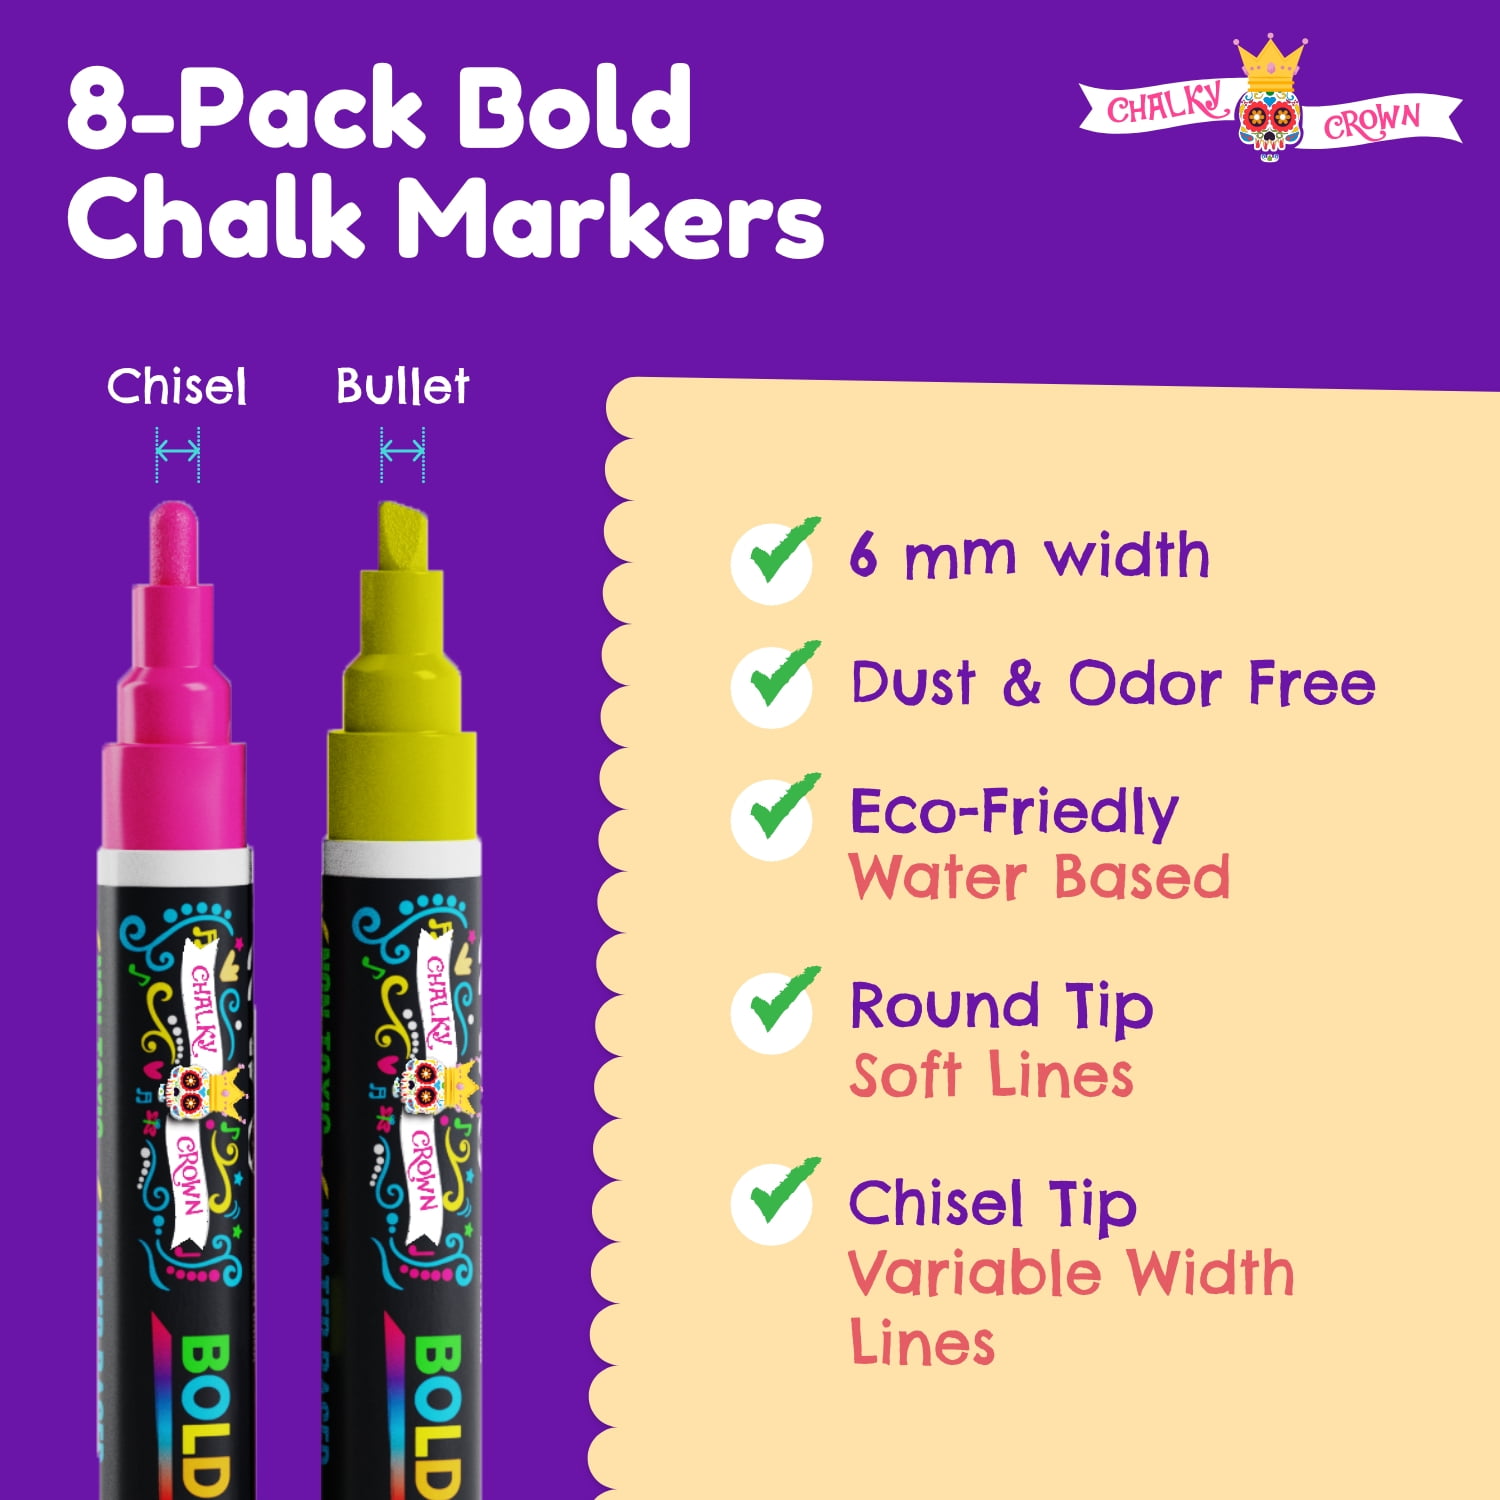 Chalky Crown - Bold Chalk Markers - Dry Erase Marker Pens - Reversible Tip  - 8 Pack, 6 mm 